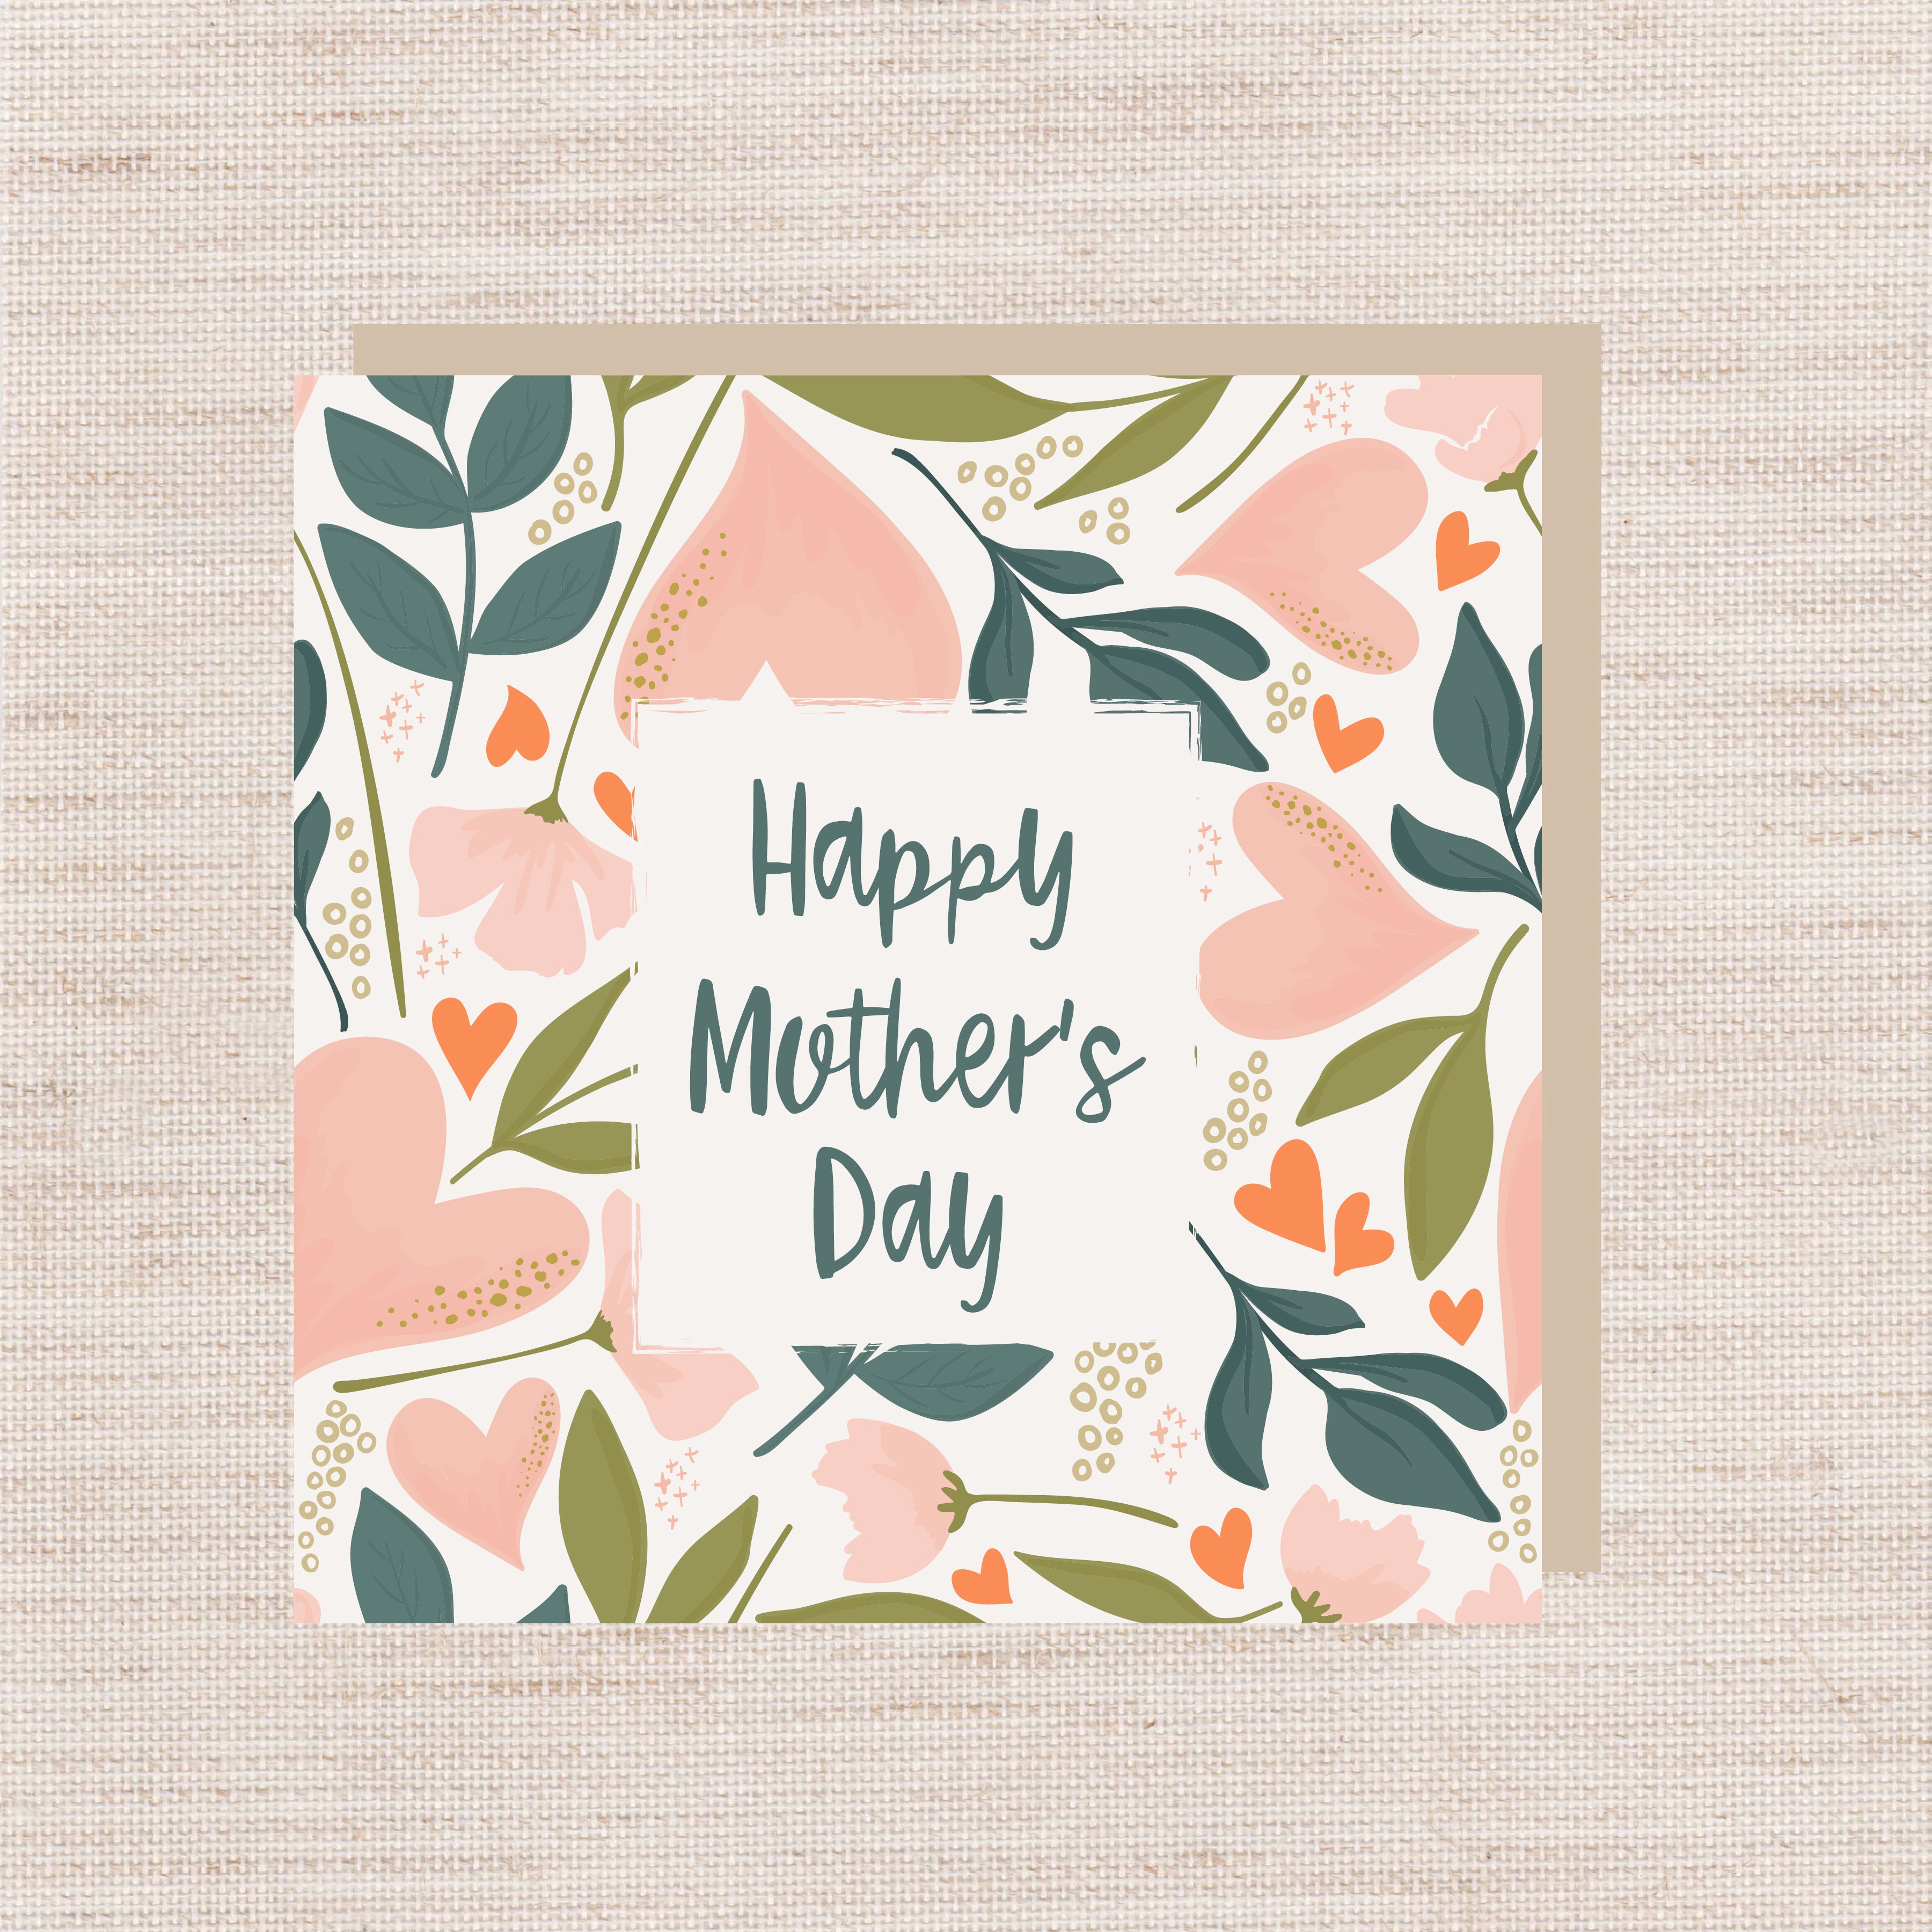 Petit Happy Mother's Day Love Card